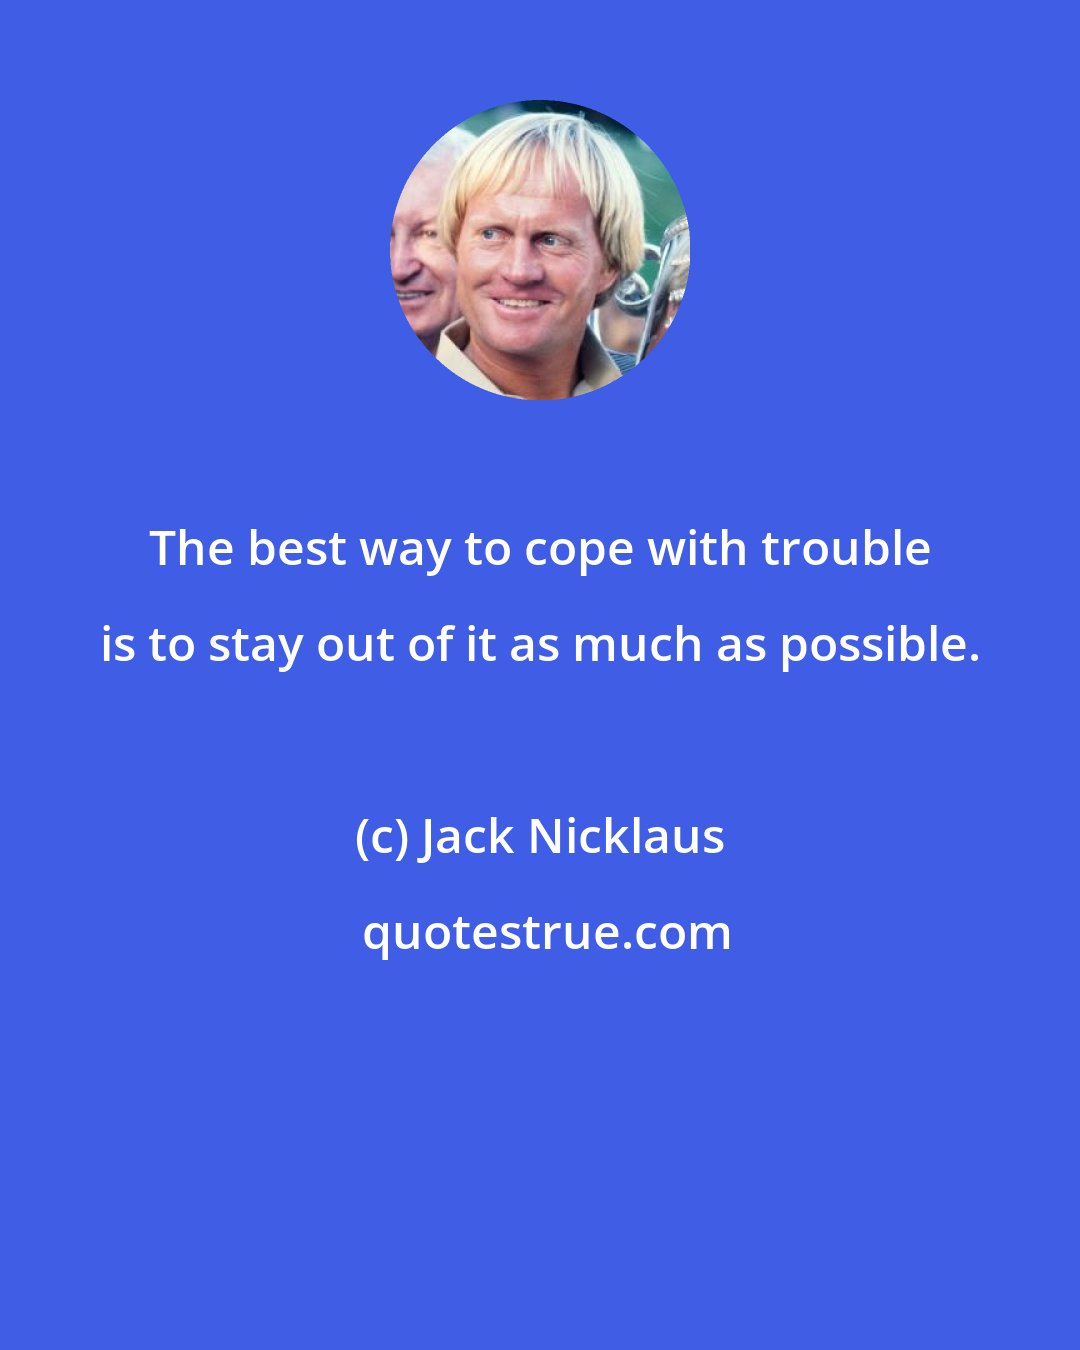 Jack Nicklaus: The best way to cope with trouble is to stay out of it as much as possible.